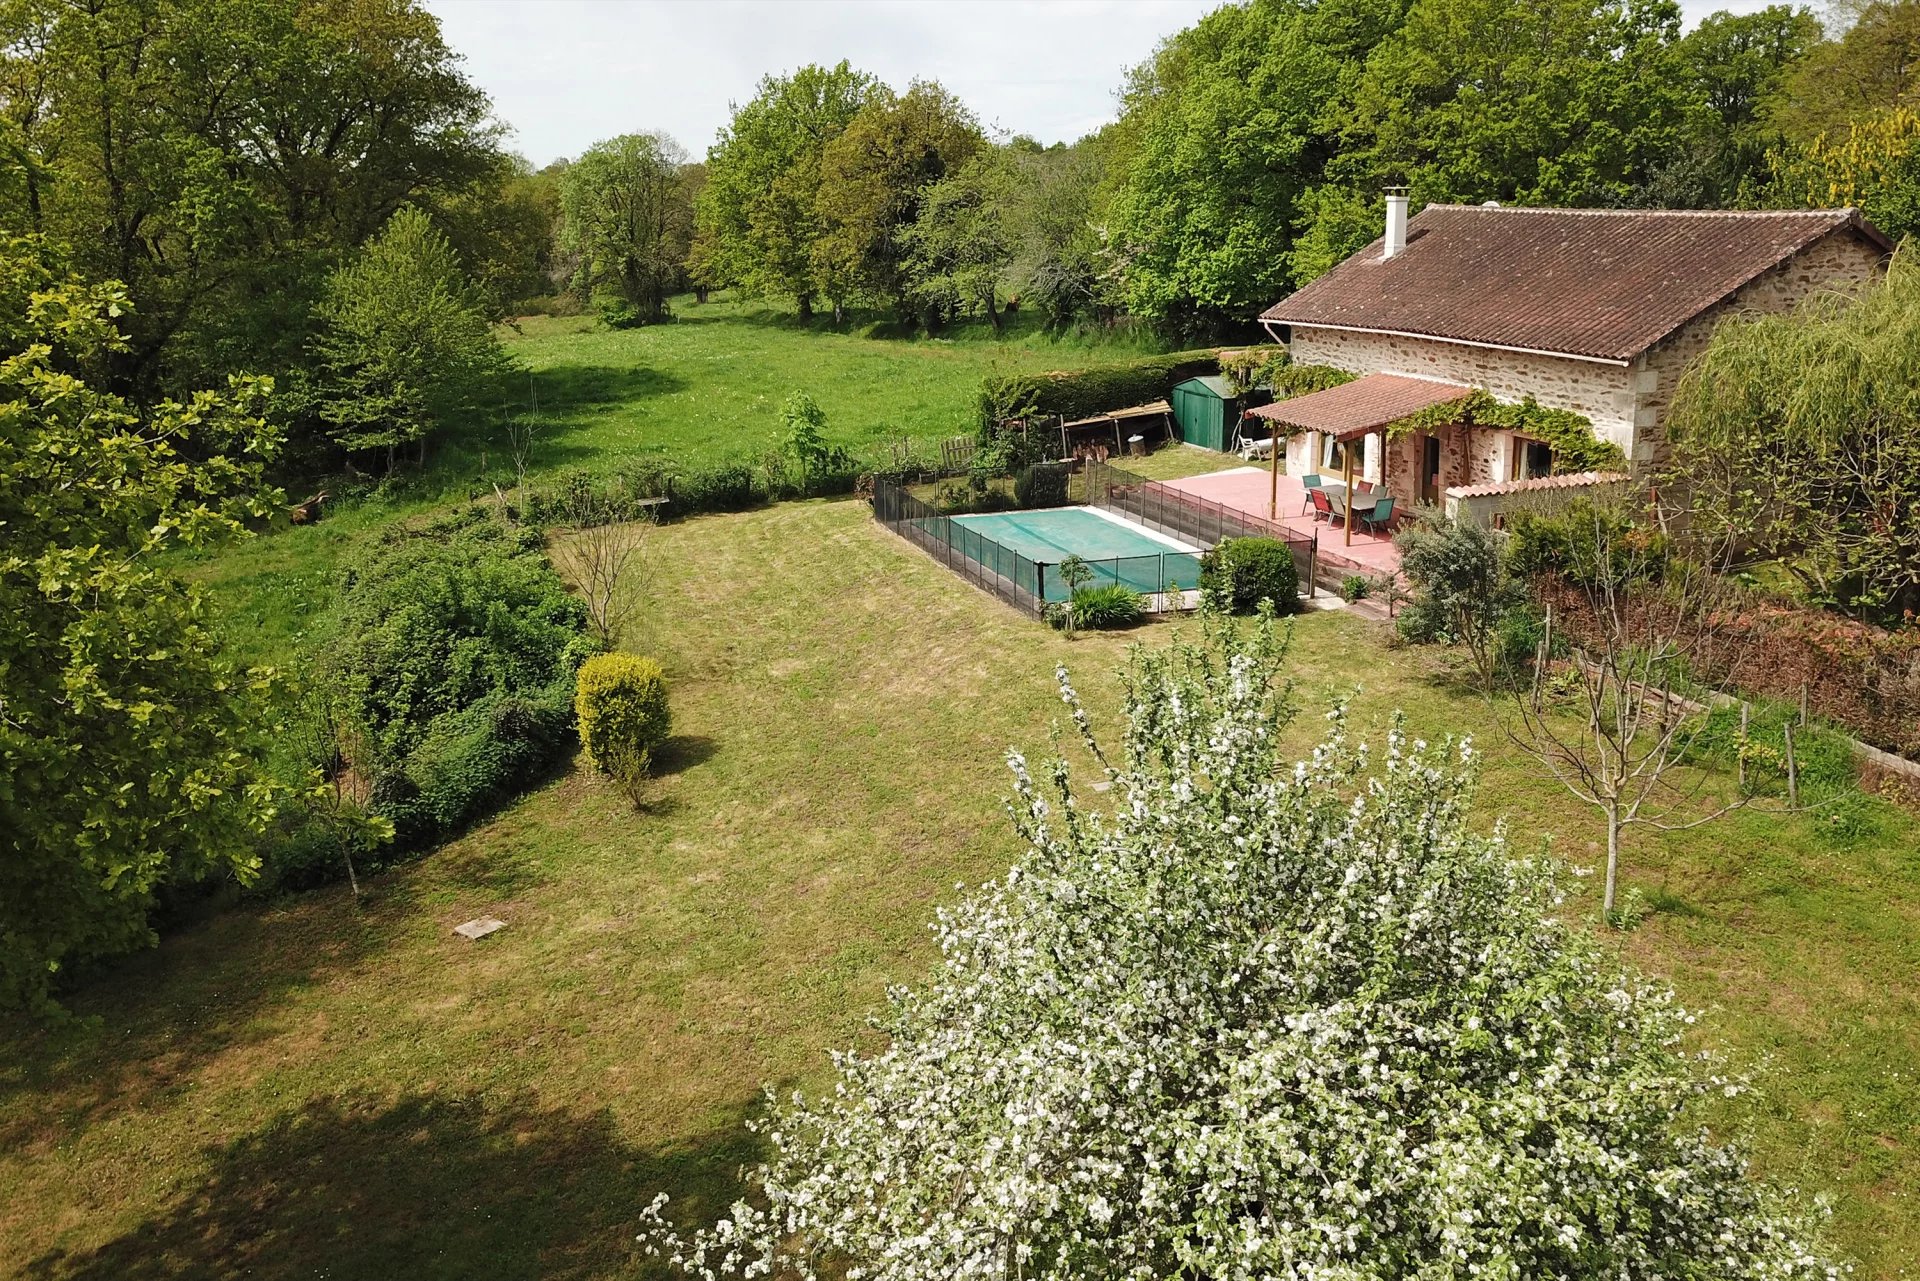 Lovely 4 bed home with pool and super views